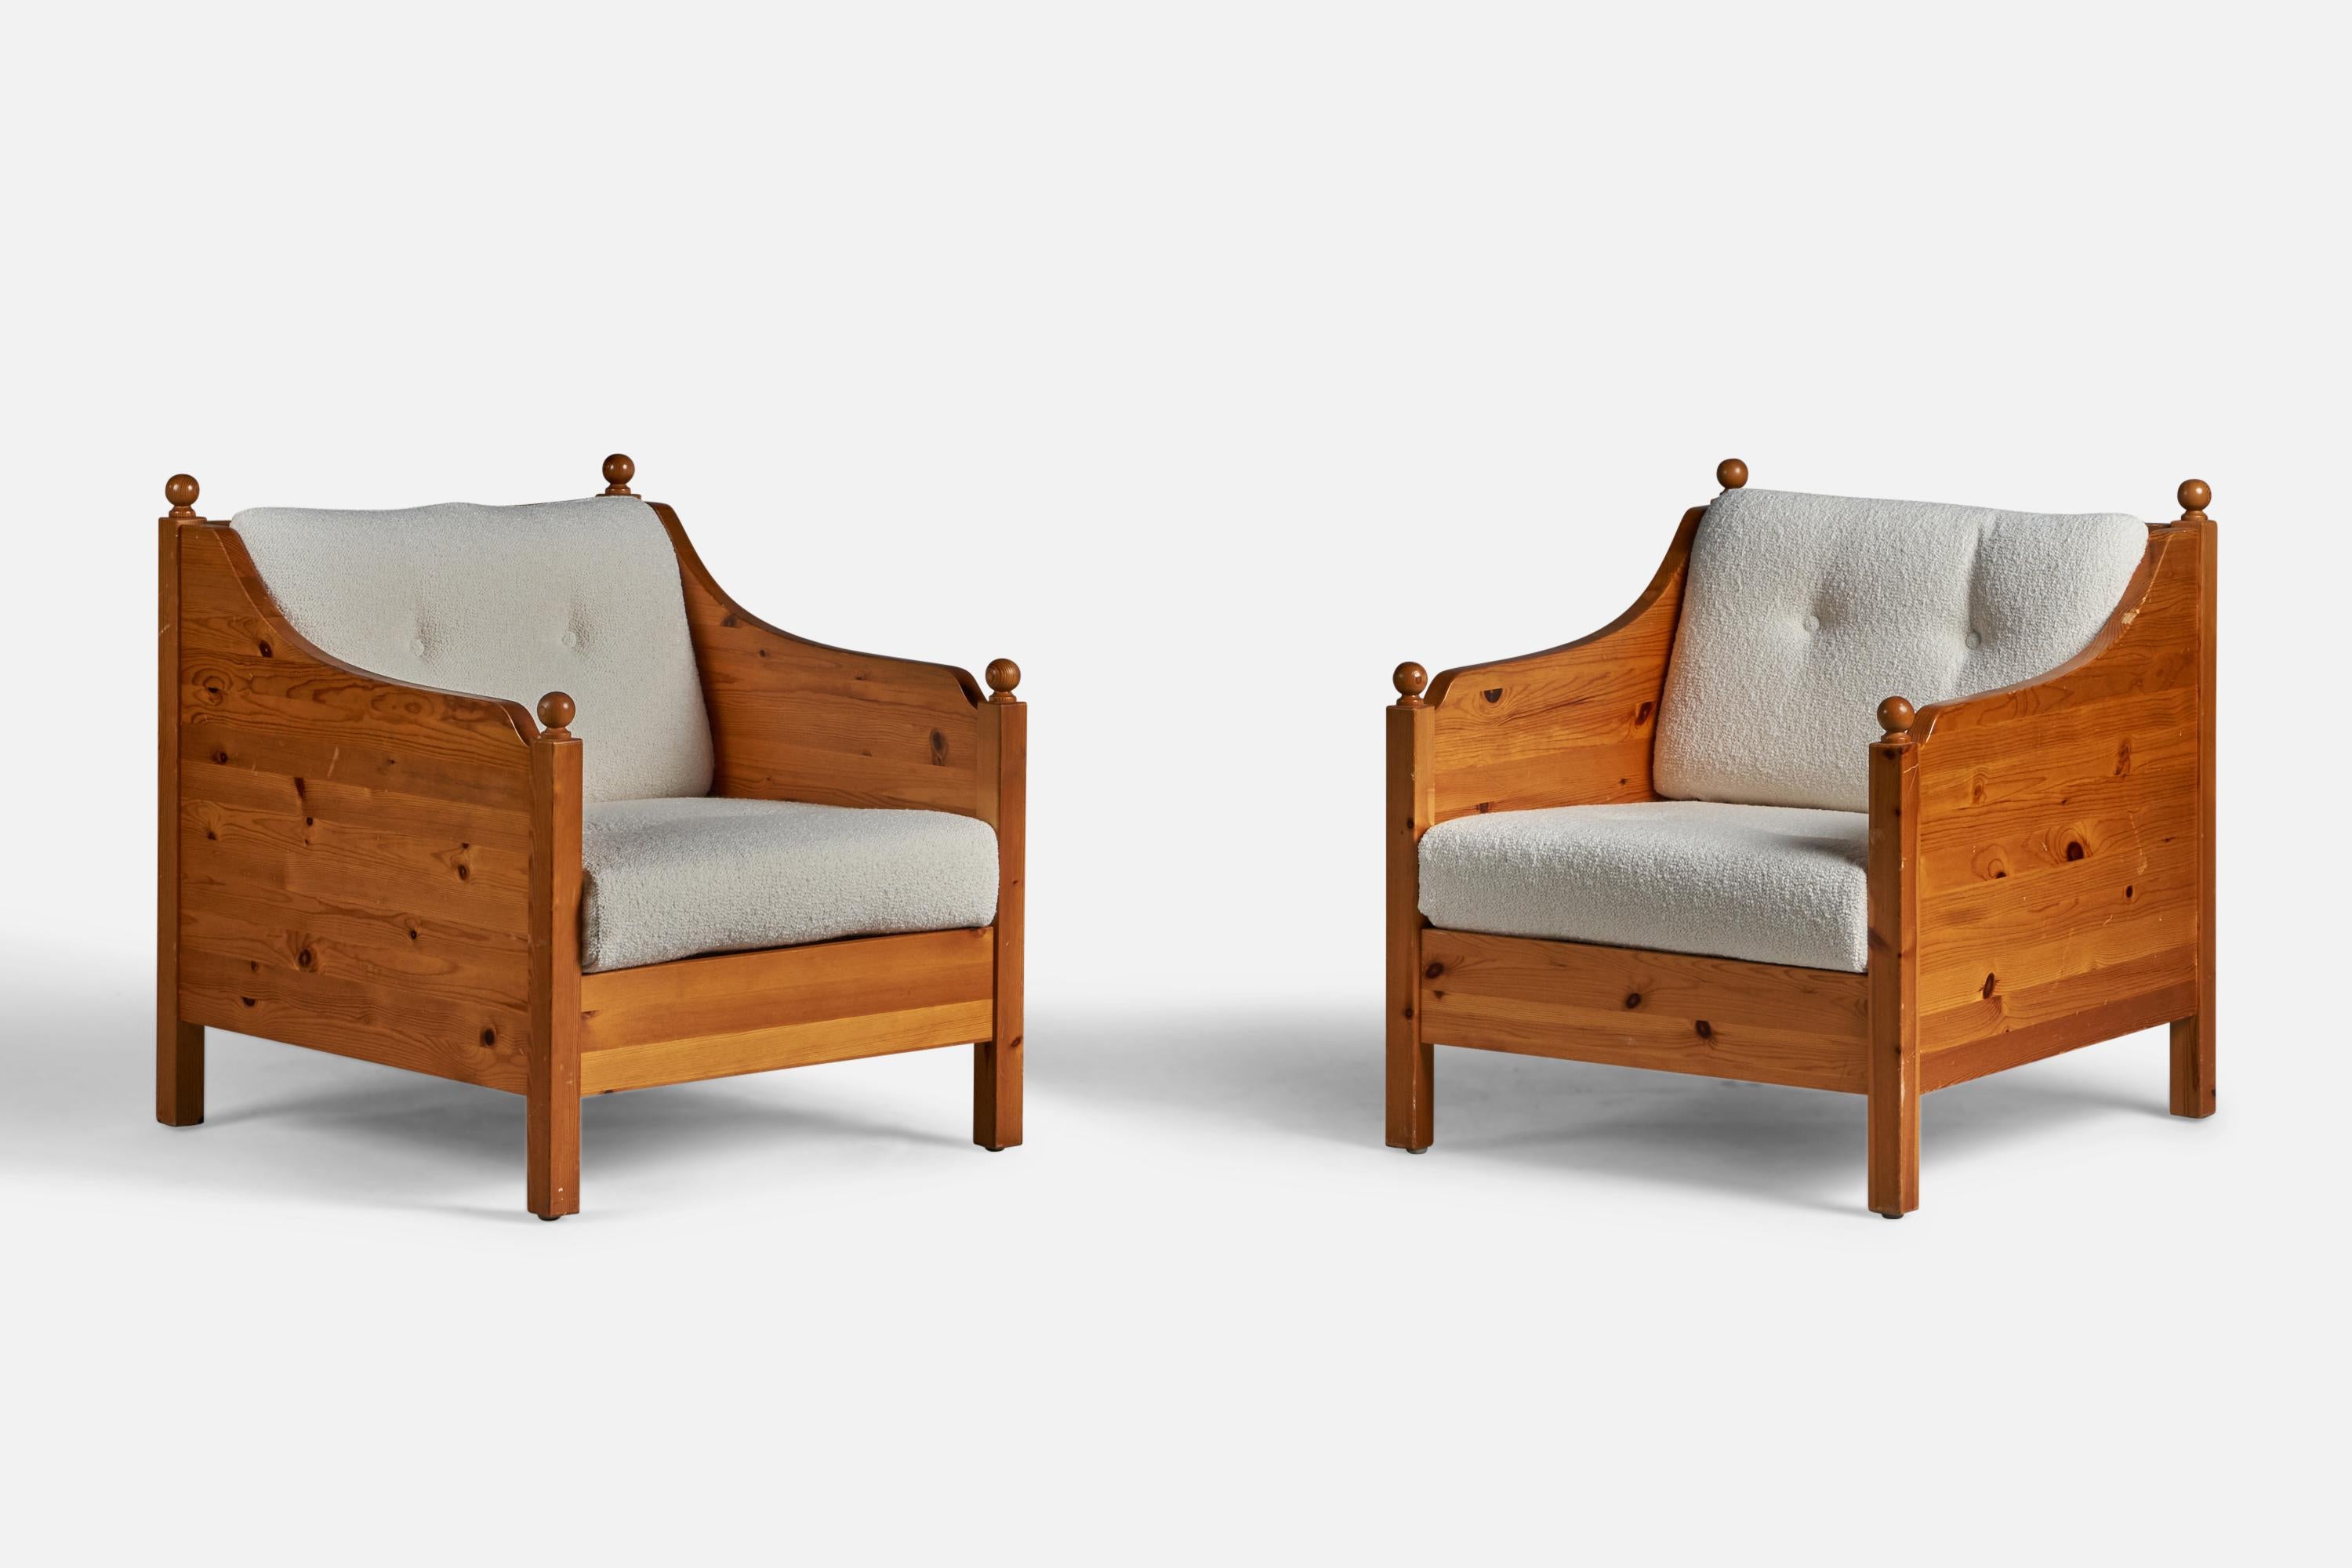 A pair of solid pine and white bouclé fabric lounge chairs, designed and produced in Sweden, 1970s.

15